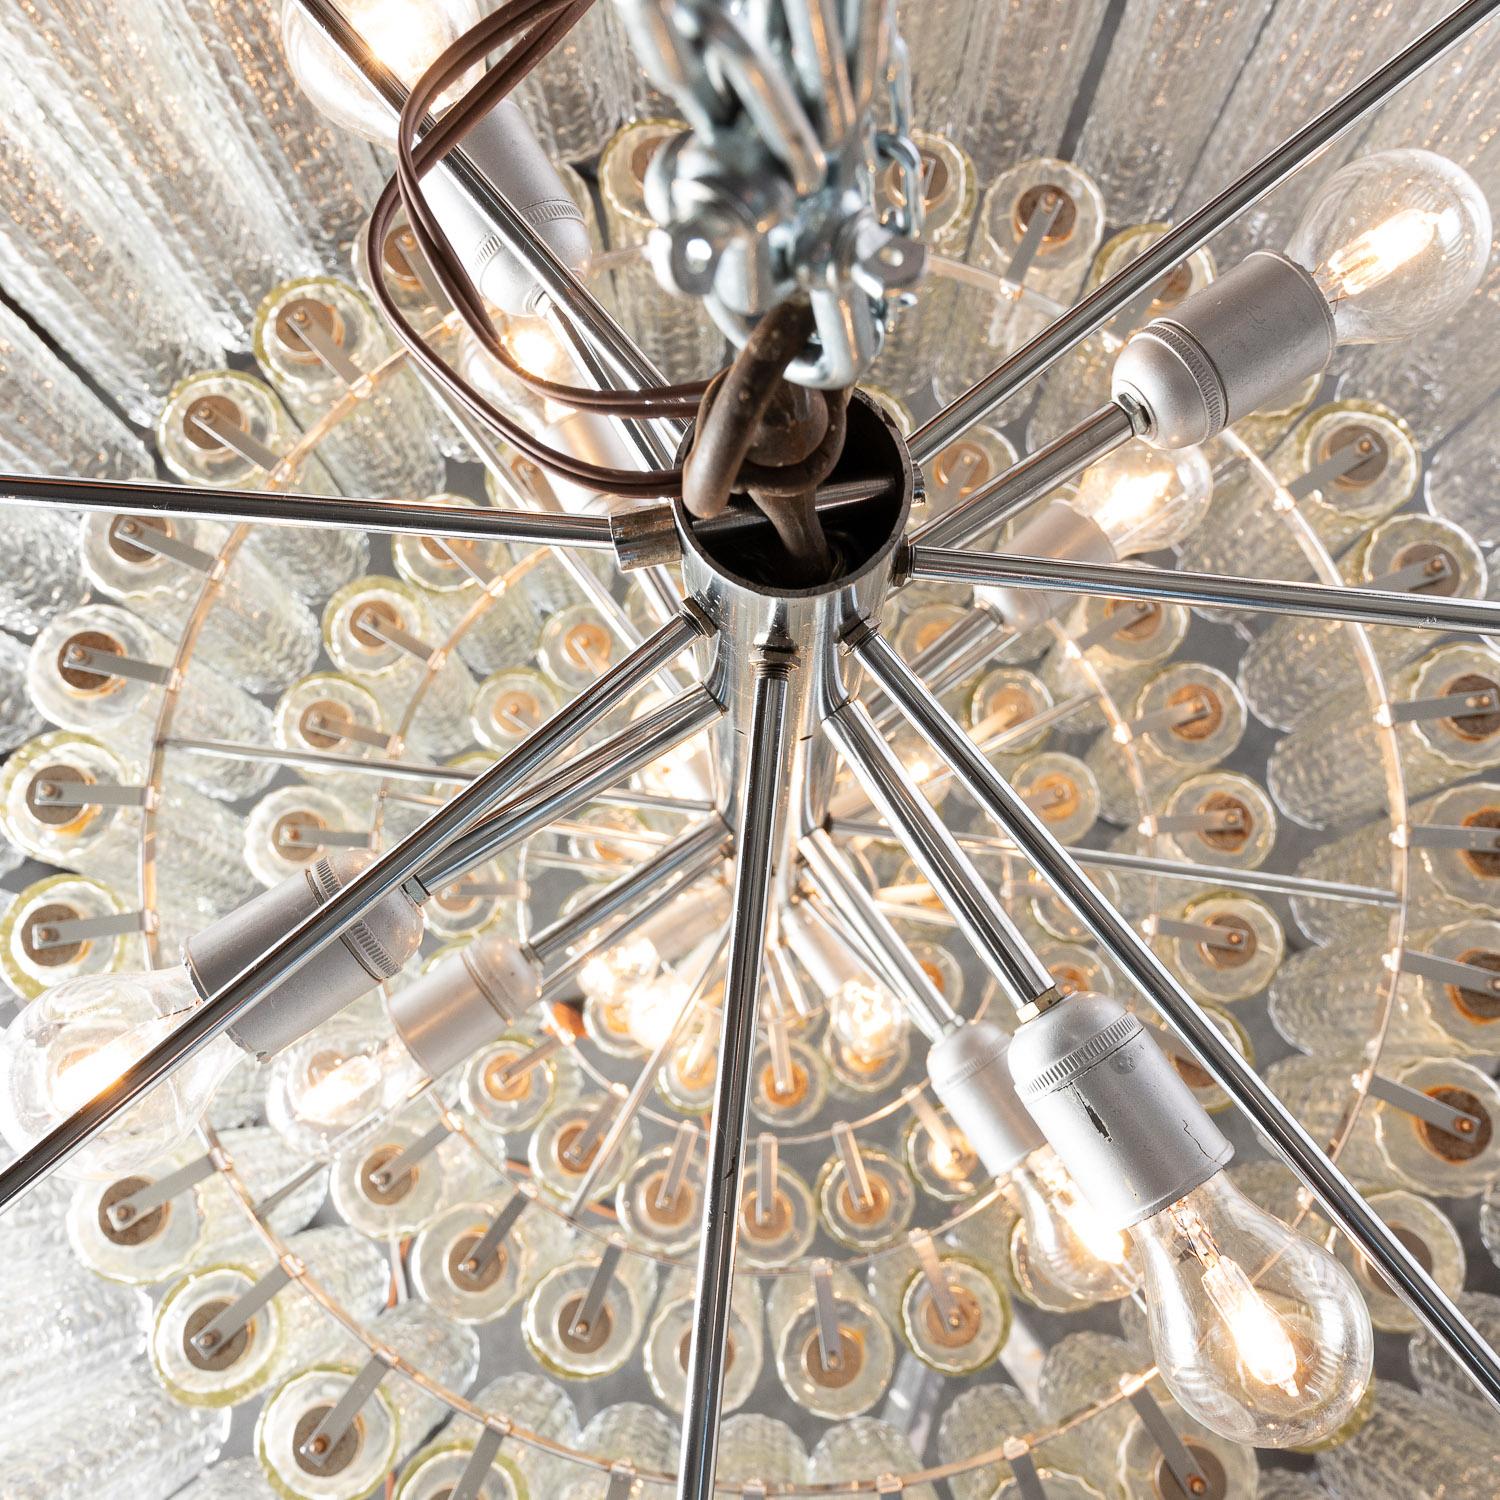 1968 pair of custom Venini chandeliers, from the 